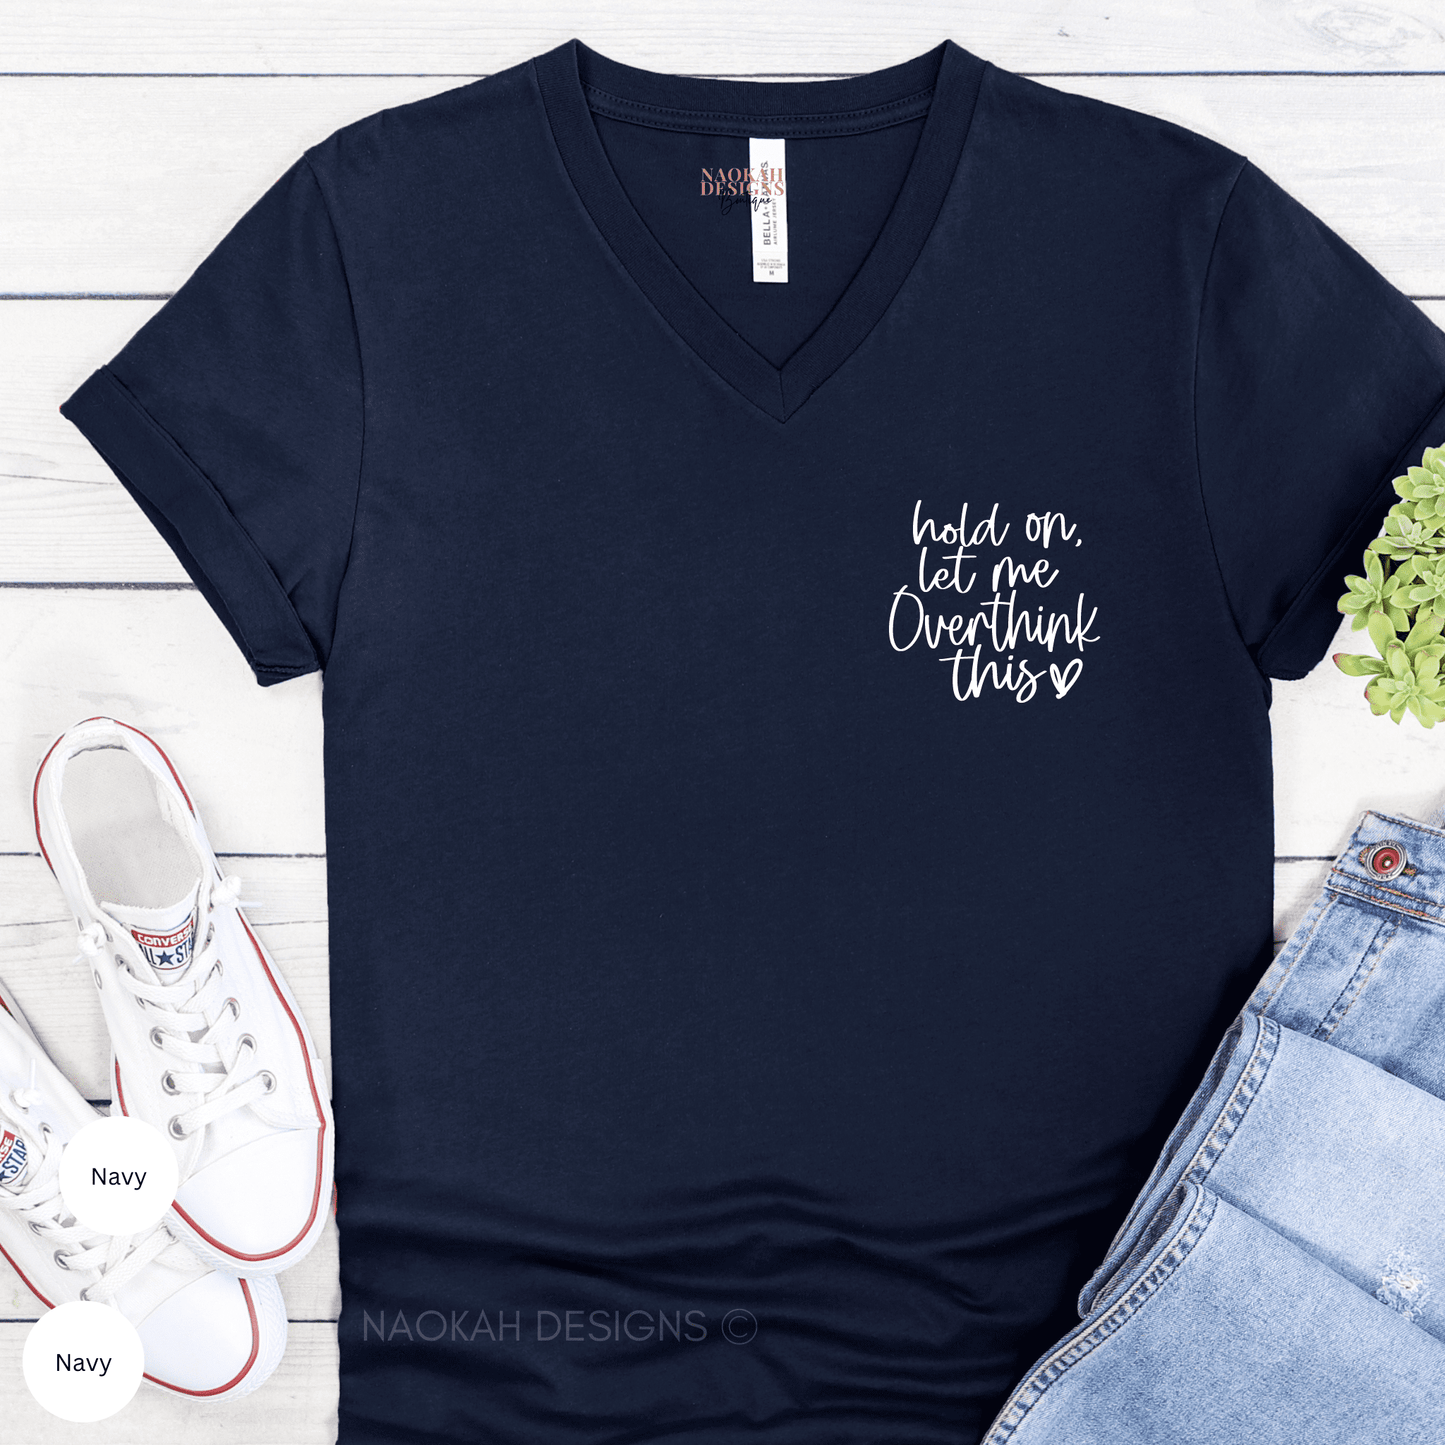 Hold On Let Me Overthink This Shirt, Funny Sarcastic Shirt, Self Love Shirt, Shirts with Sayings, Be Kind Shirt, Anxious Shirt, Mental Tee